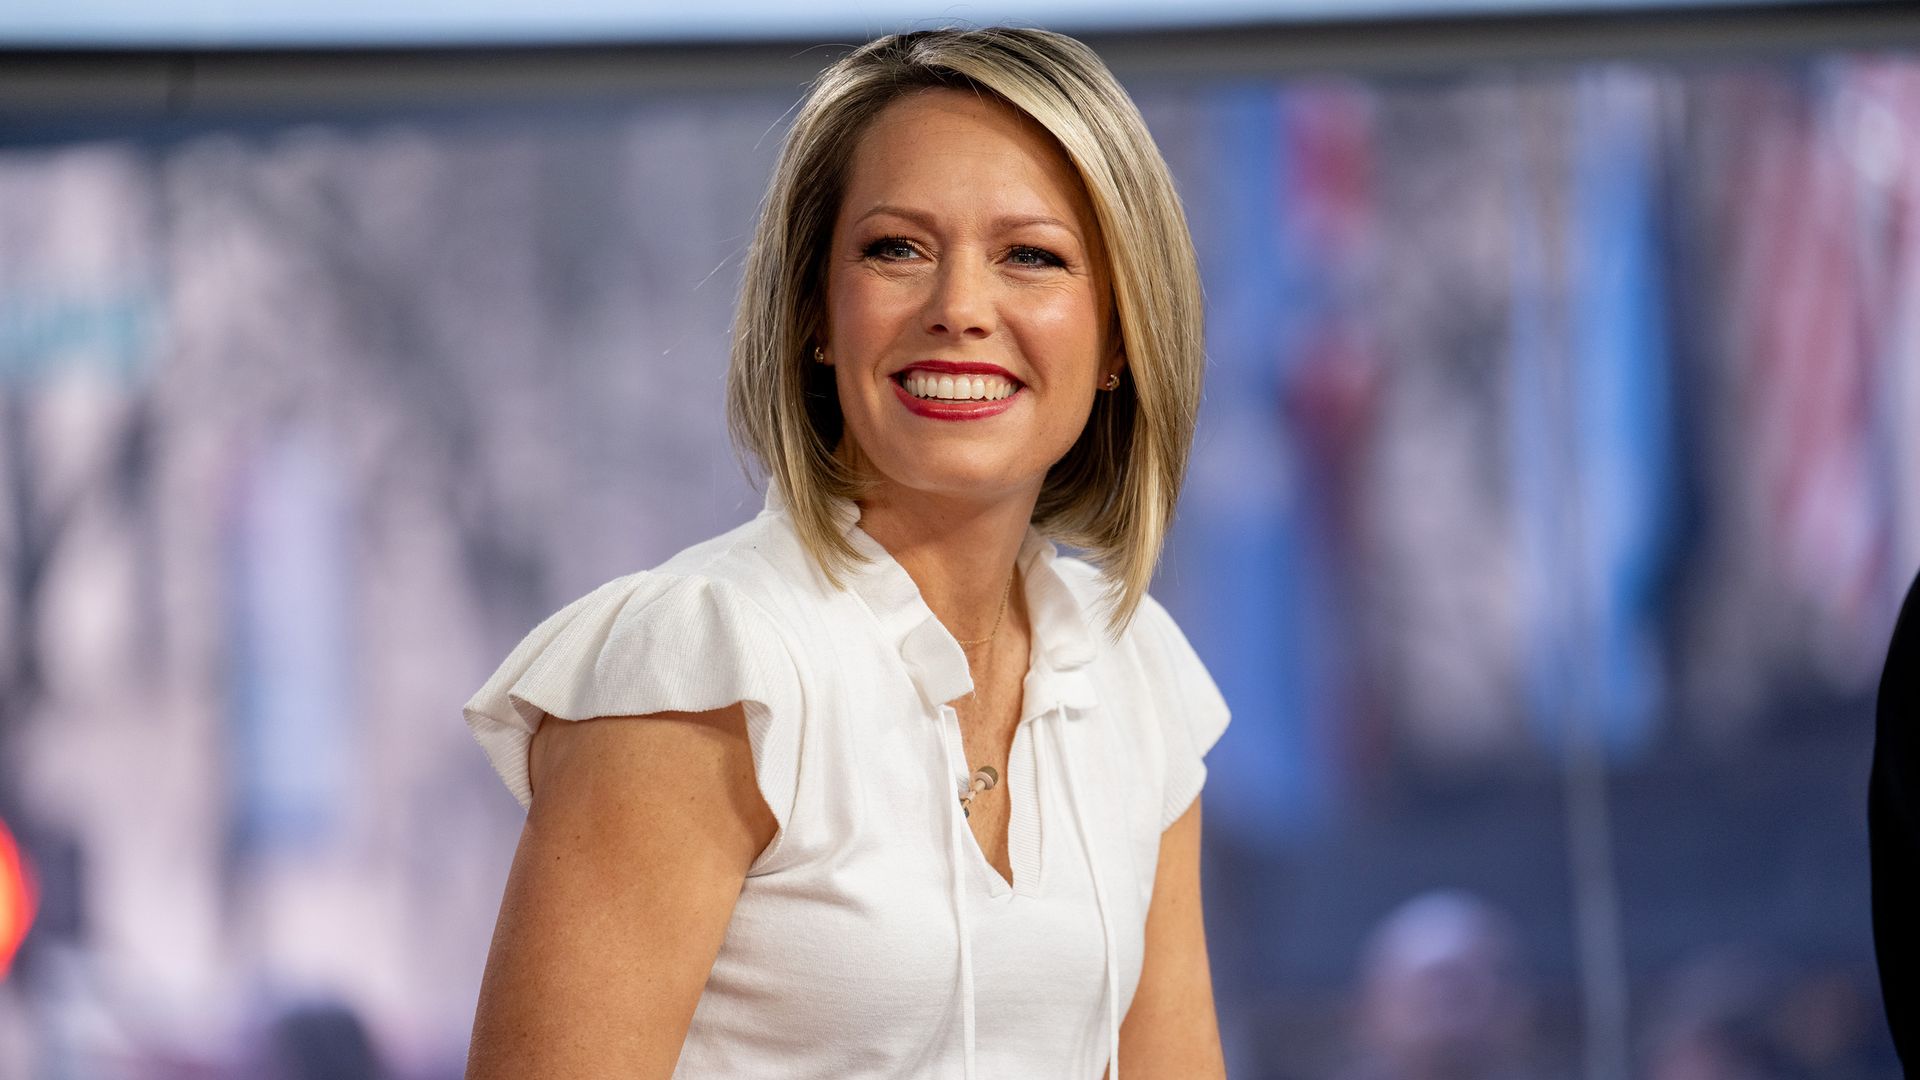 Dylan Dreyer's 'dreams come true' in unforgettable Today Show moment